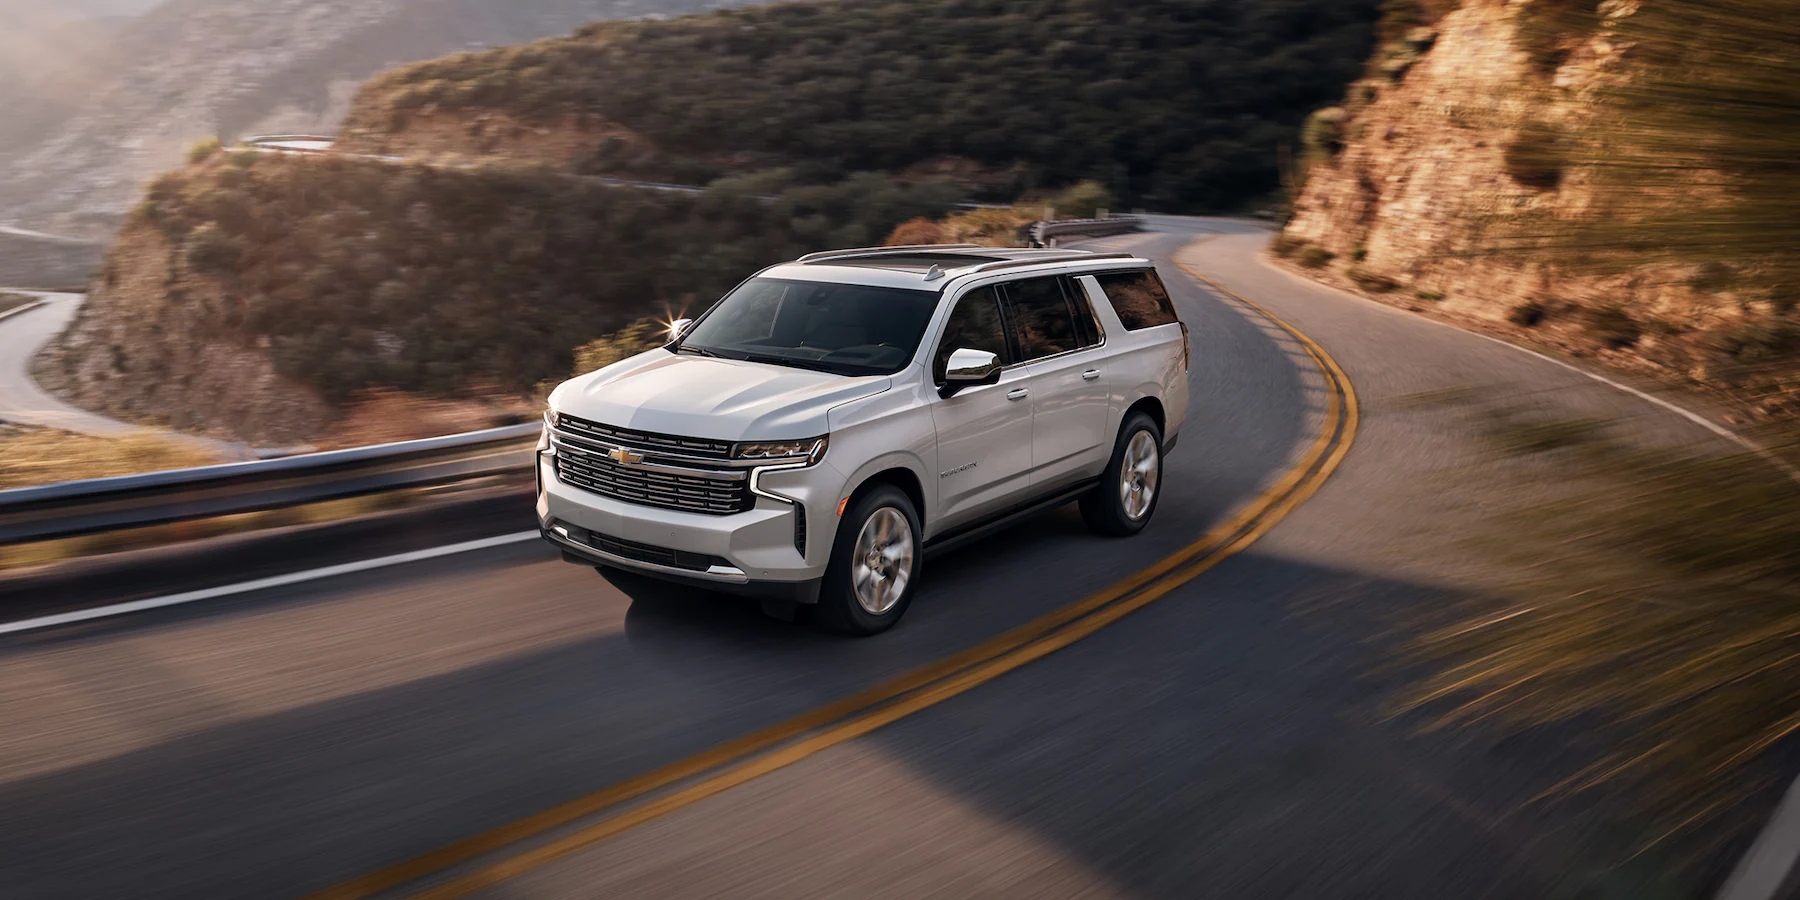 2022 Chevy Suburban on the Road